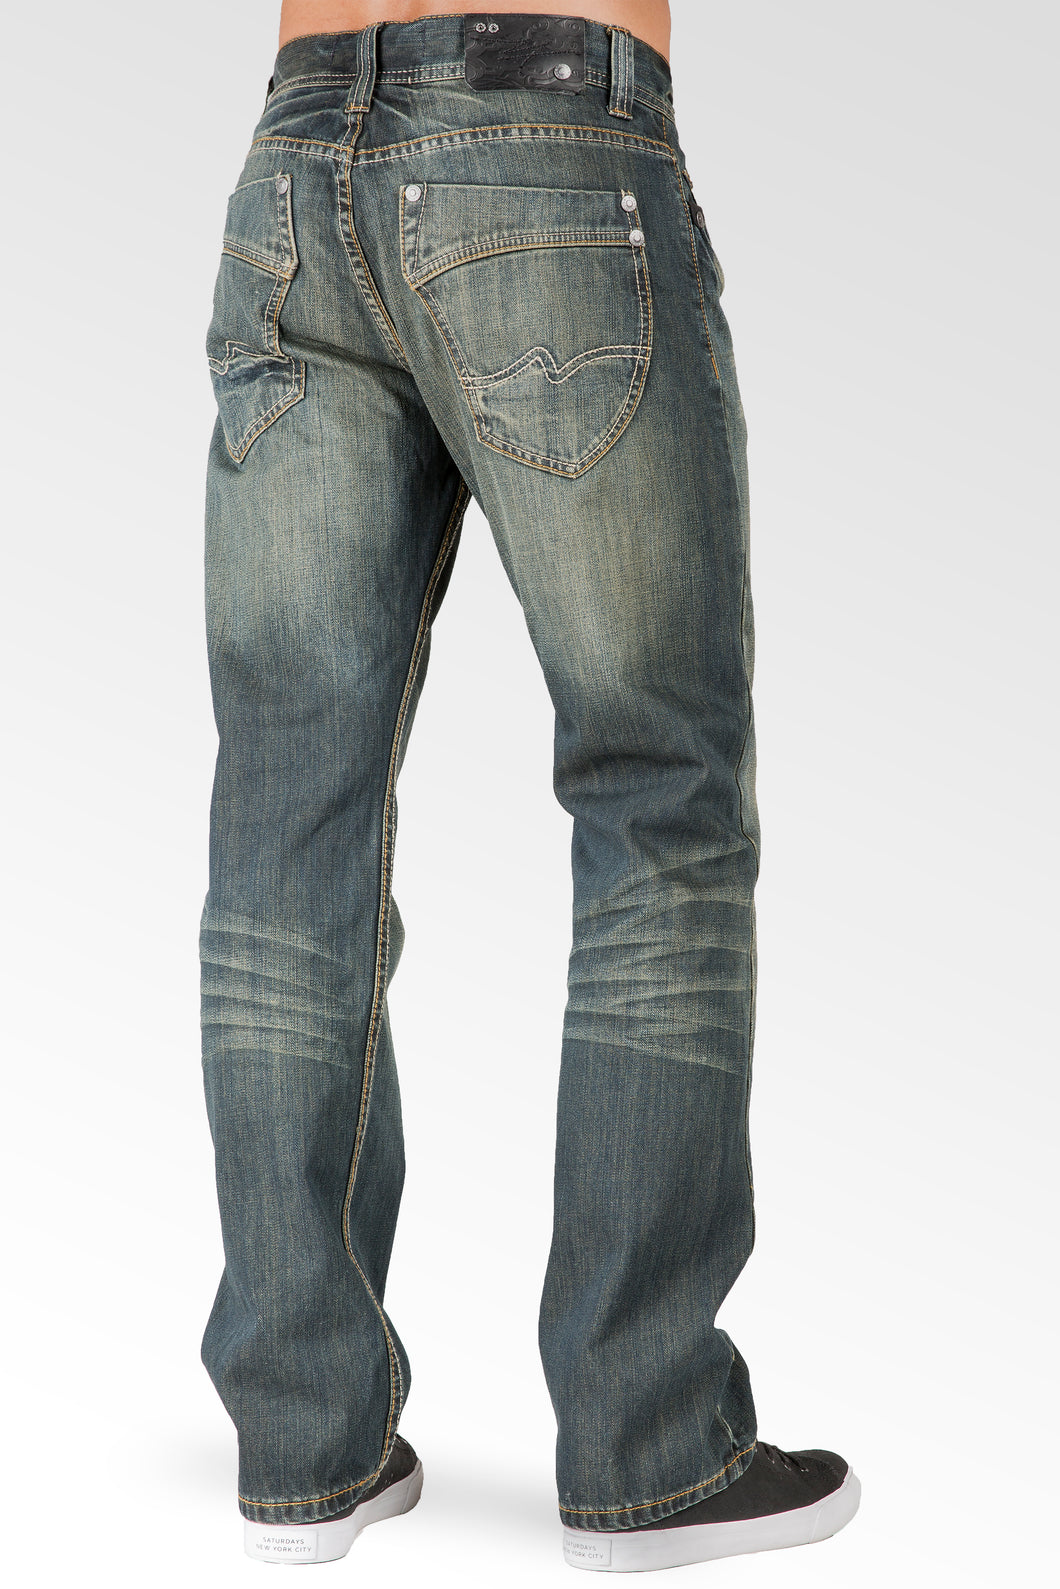 Level 7 Men's Relaxed Straight Hand Rub Rustic Tinted 5 Pocket Jeans ...